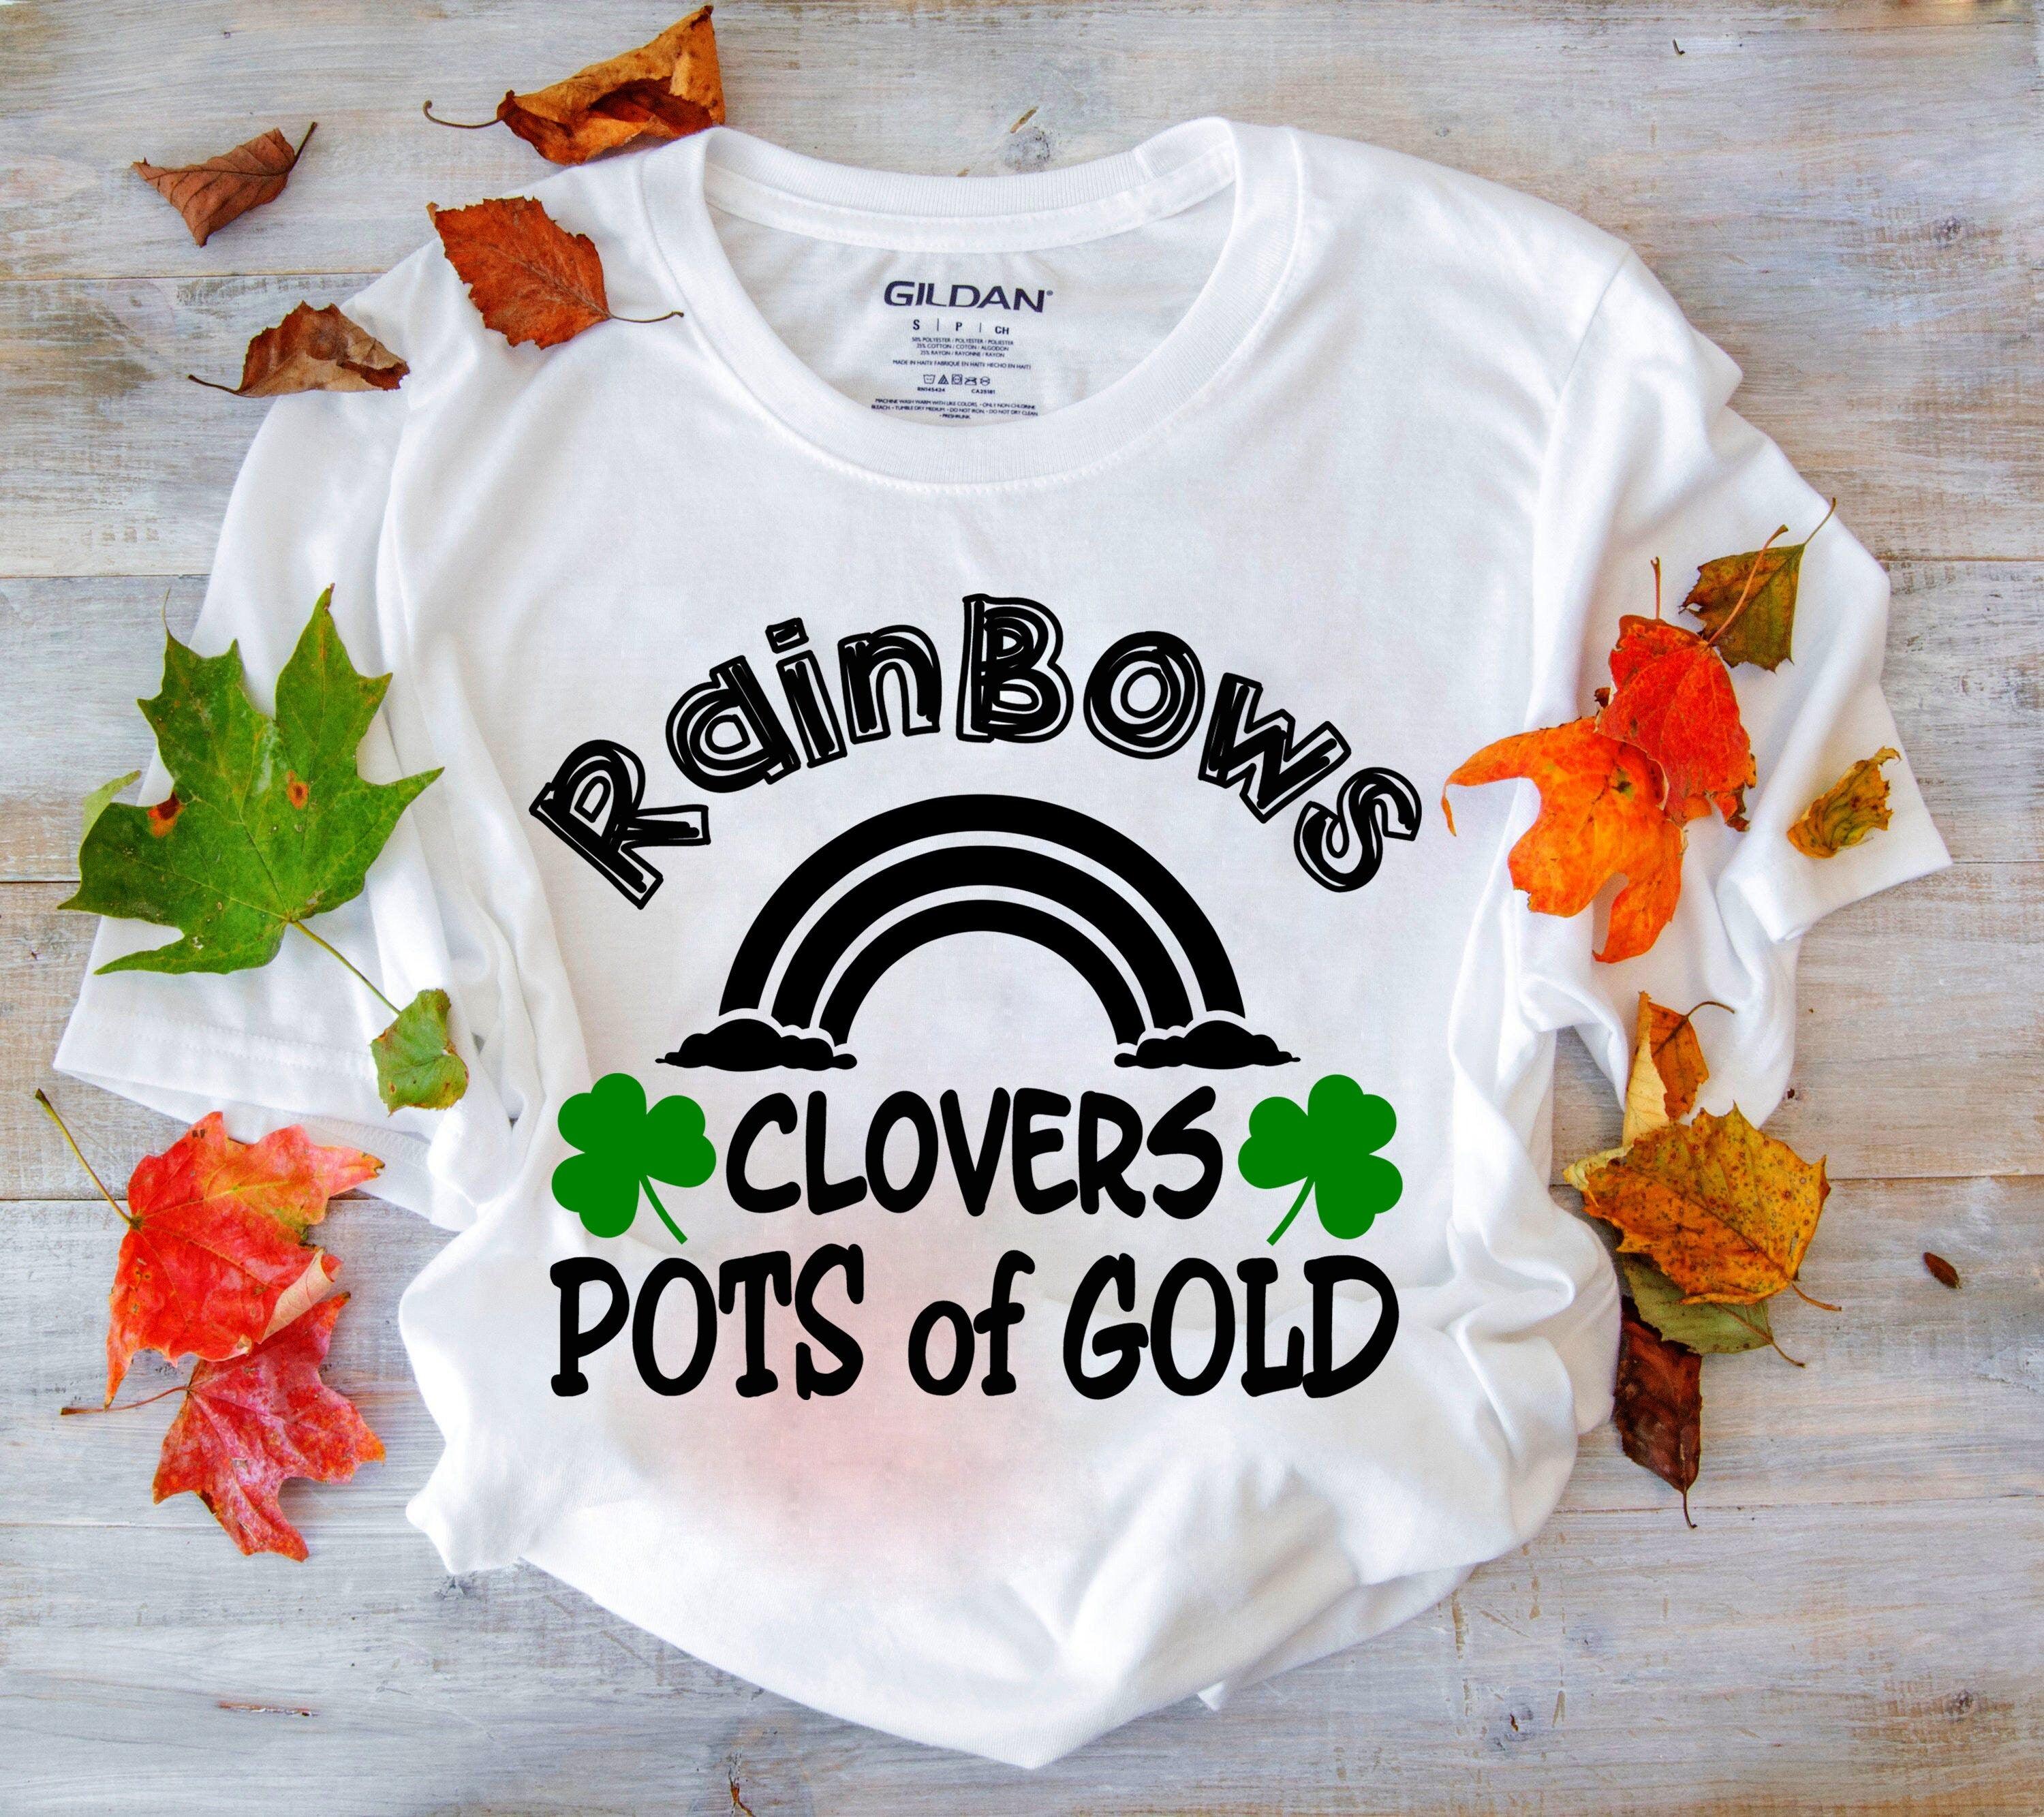 Rainbows Clovers Pots Of Gold T-shirts Kald mig Pinch, I am irish, Pinch Proof, Pots Of Gold, st paddys day, st patrick party, St Patricks day - plusminusco.com